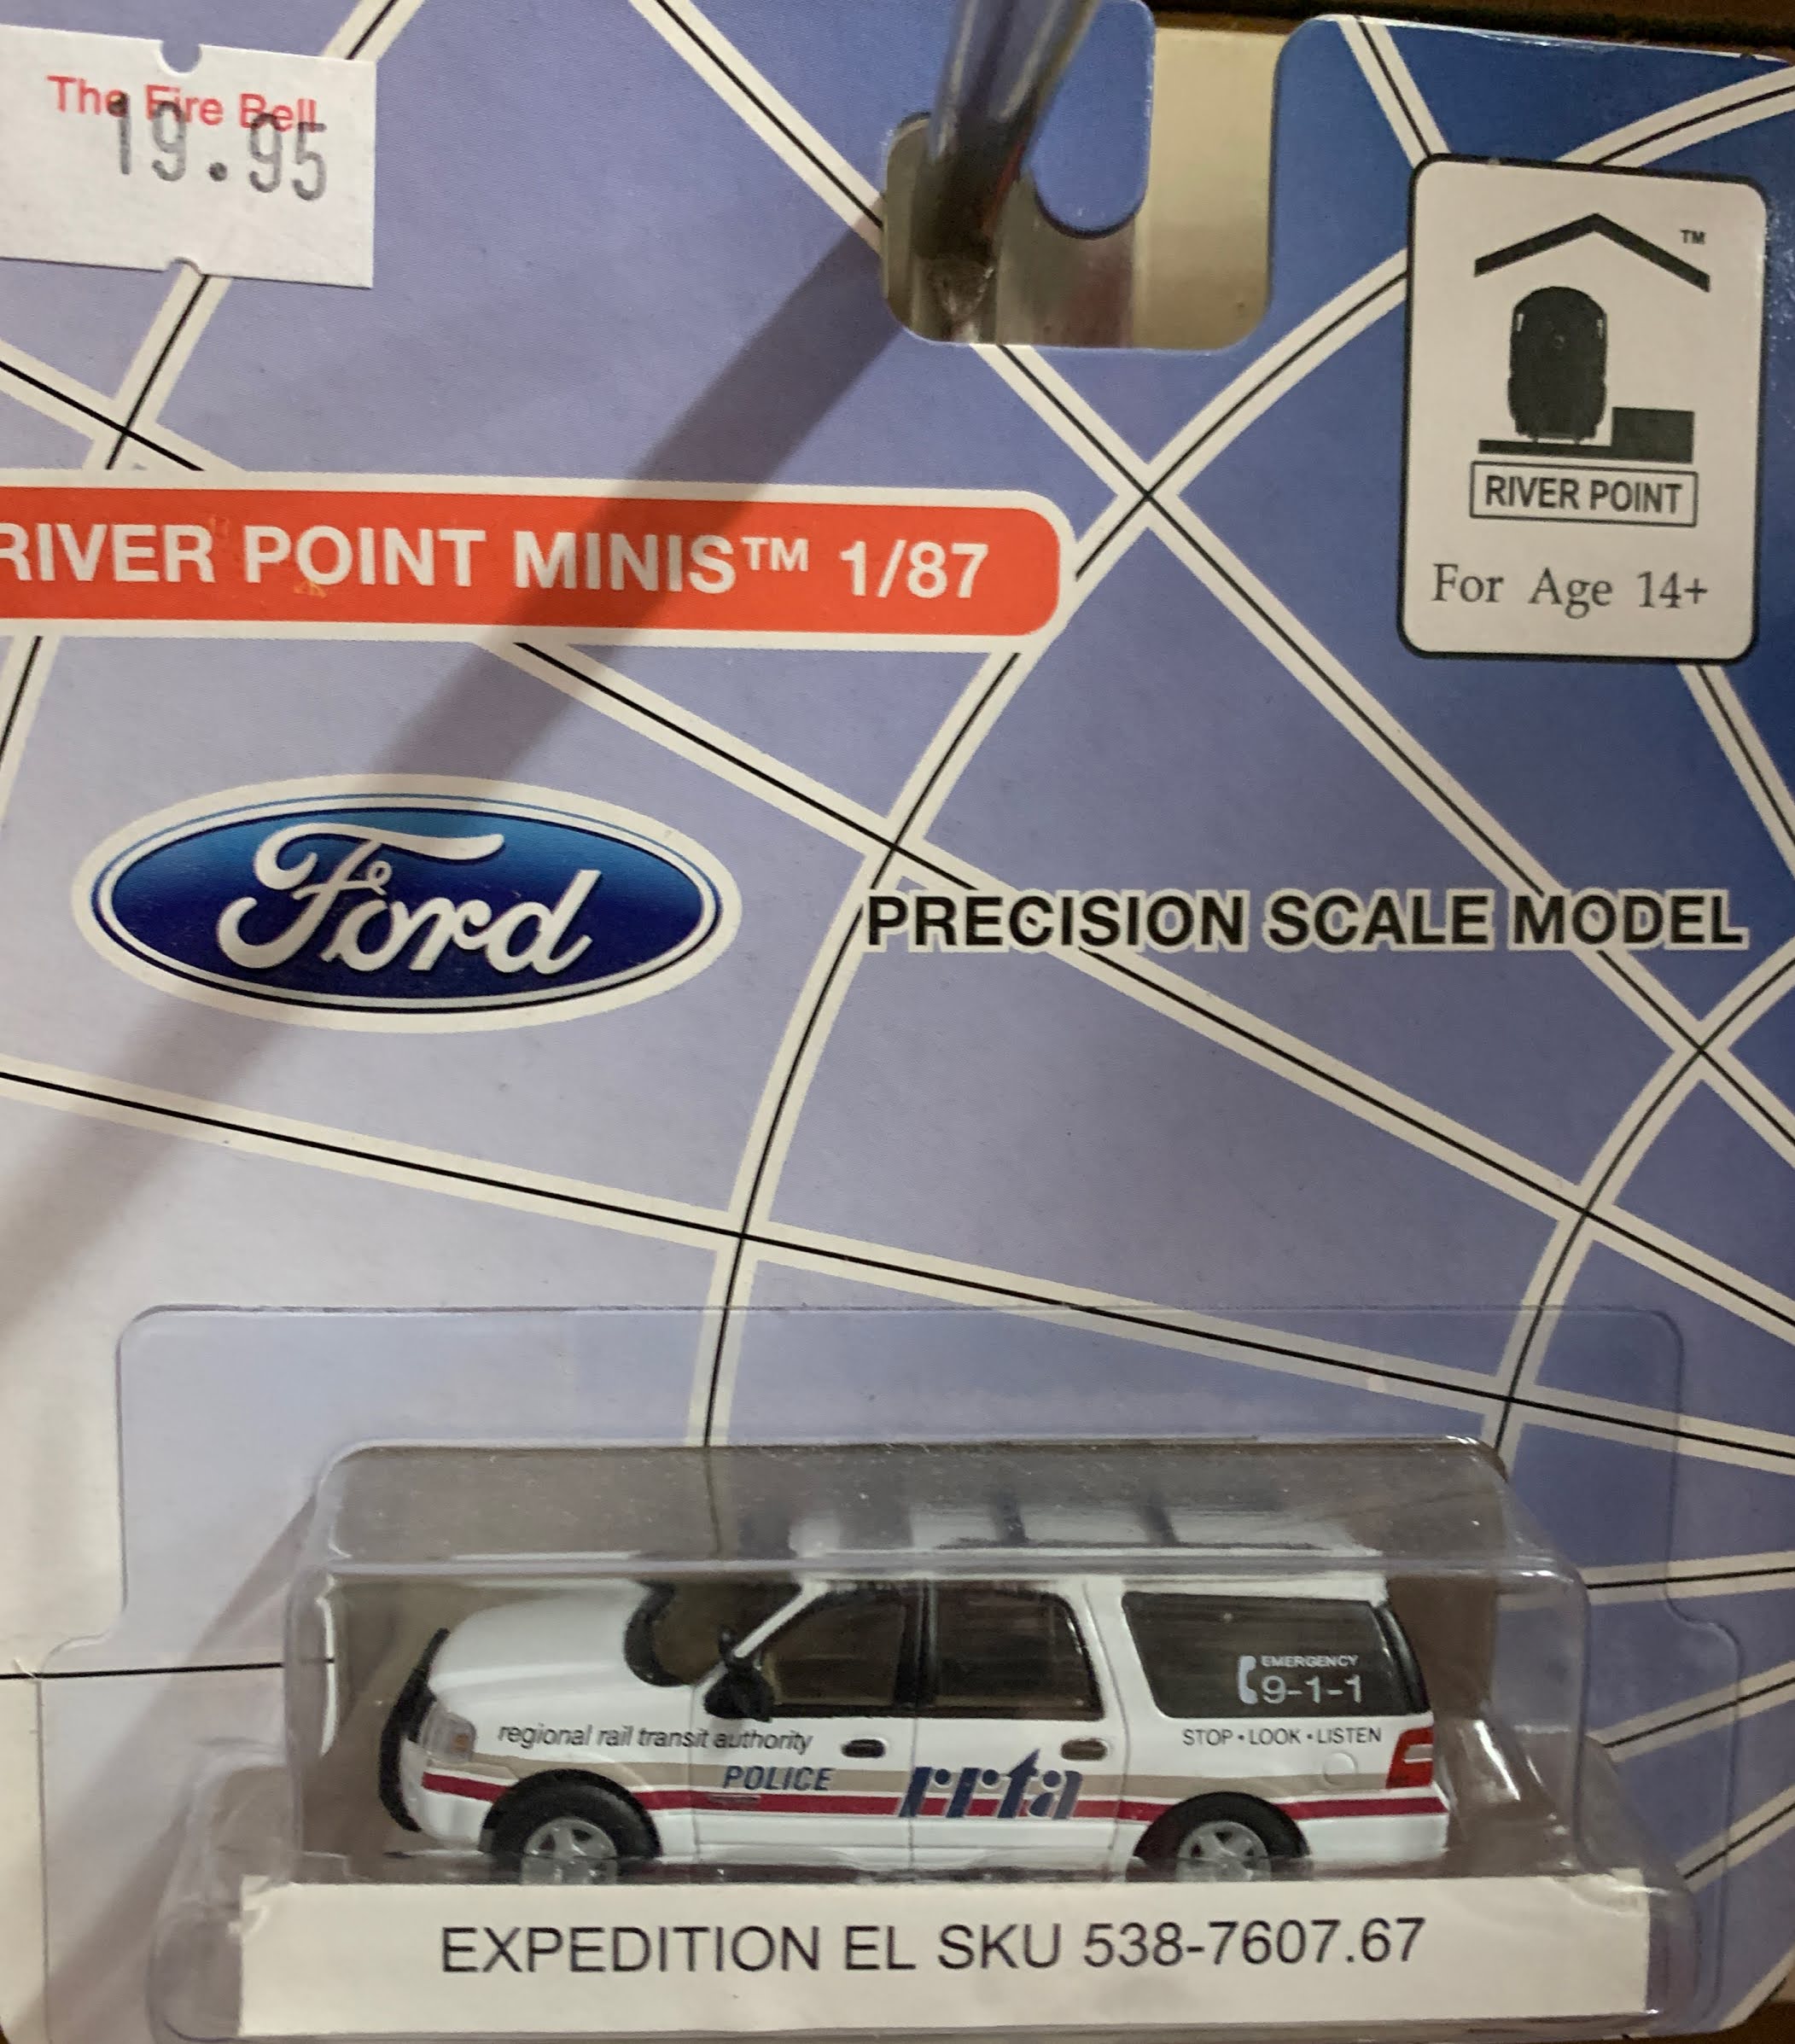 Ford Expedition, Regional Rail Transit Authority